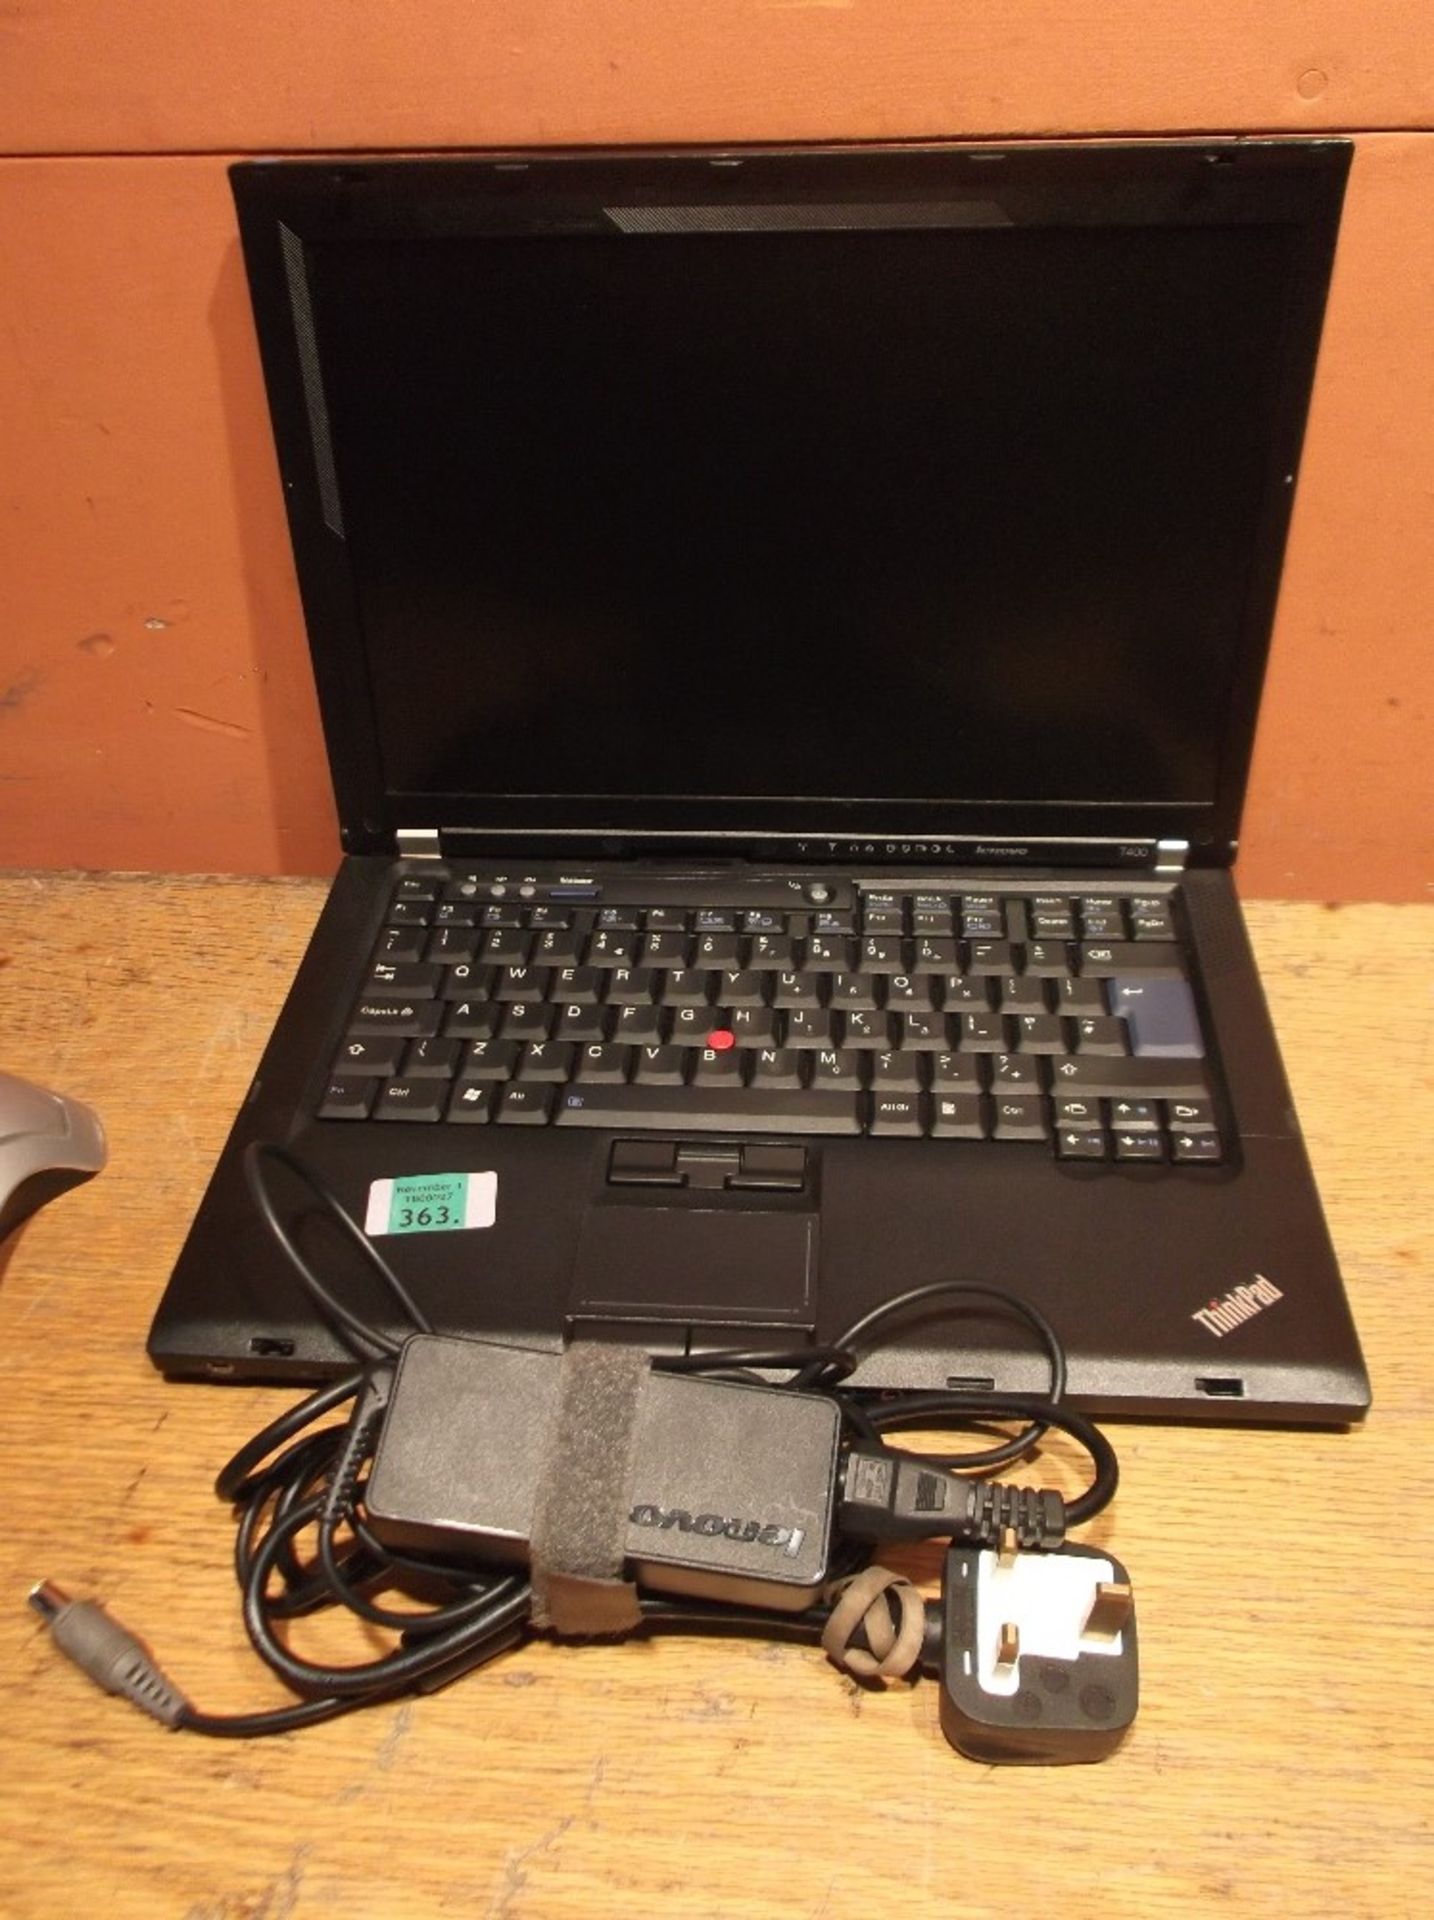 LENOVO T400 Laptop - Intel Core 2 Duo @ 2.53Ghz - 2GB Ram - 160GB Hdd - DVD-Rom - Charger - Extended